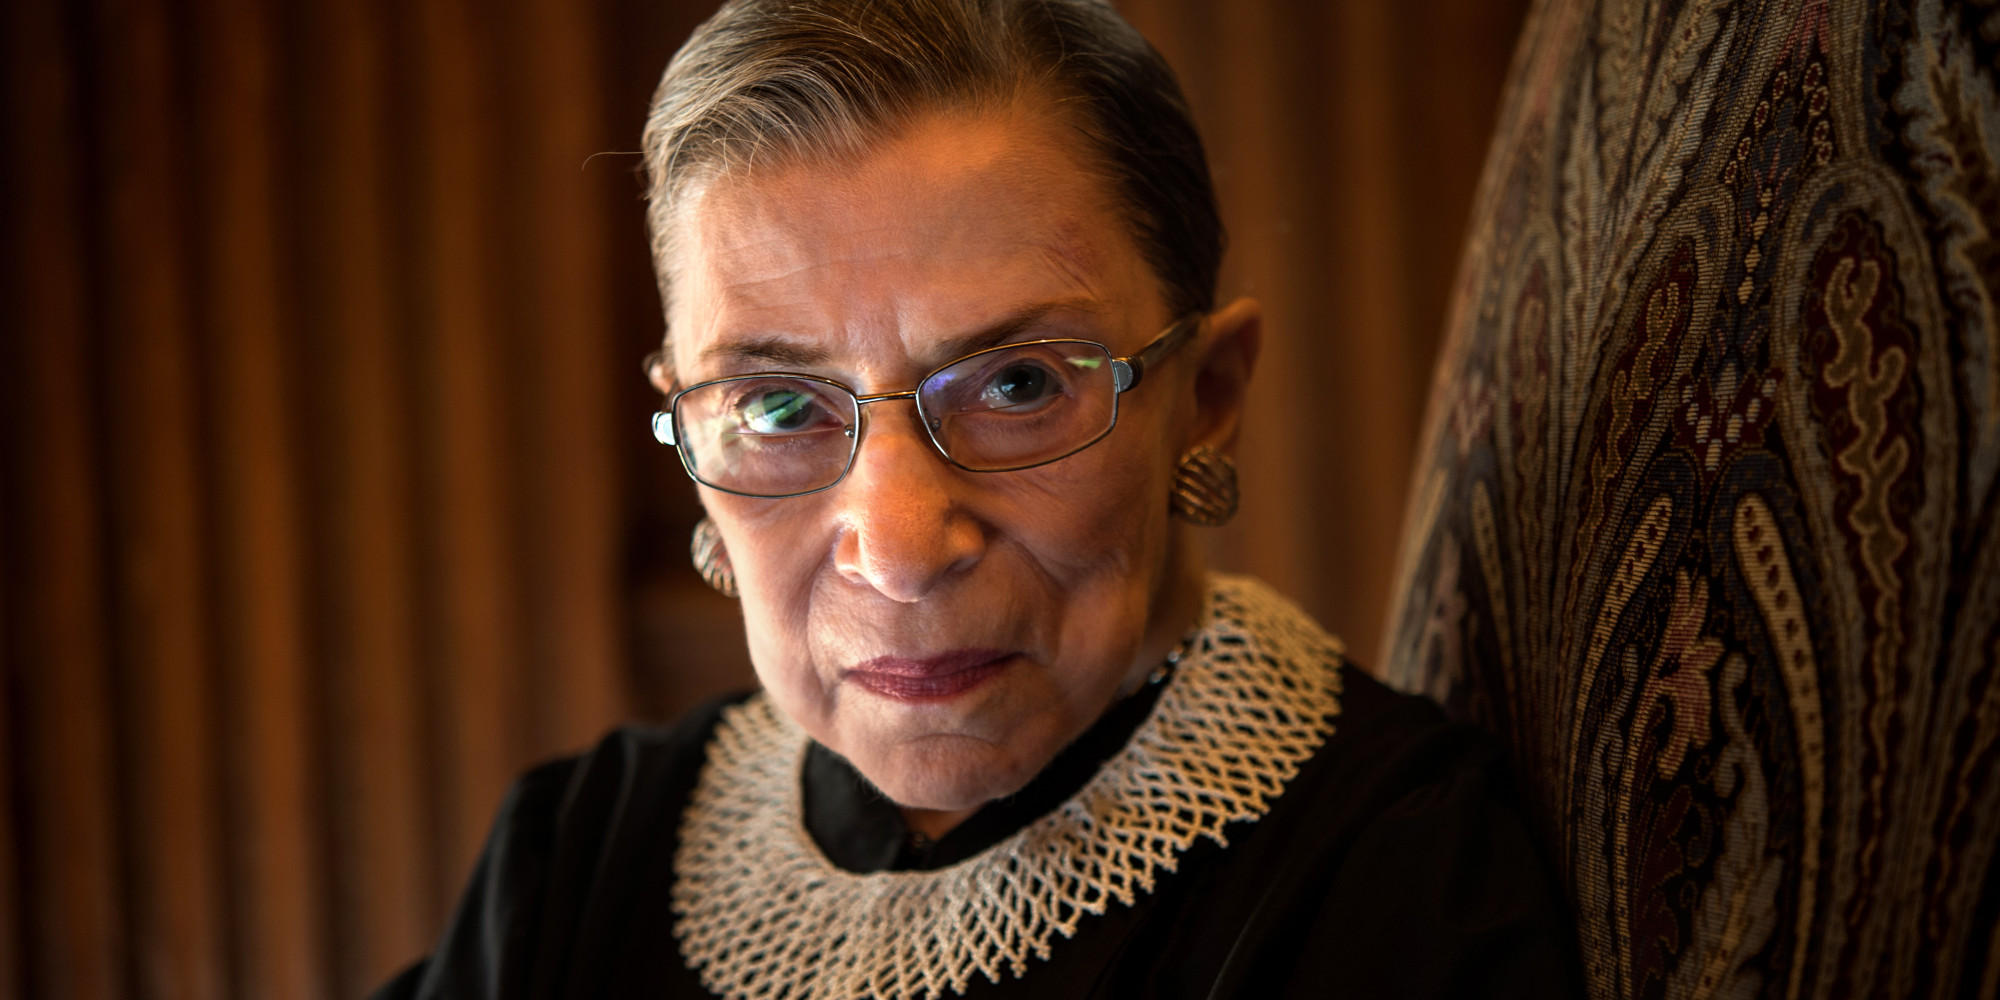 WASHINGTON, DC - AUGUST 30: Supreme Court Justice Ruth Bader Ginsburg, celebrating her 20th anniversary on the bench, is photographed in the West conference room at the U.S. Supreme Court in Washington, D.C., on Friday, August 30, 2013. (Photo by Nikki Kahn/The Washington Post via Getty Images)